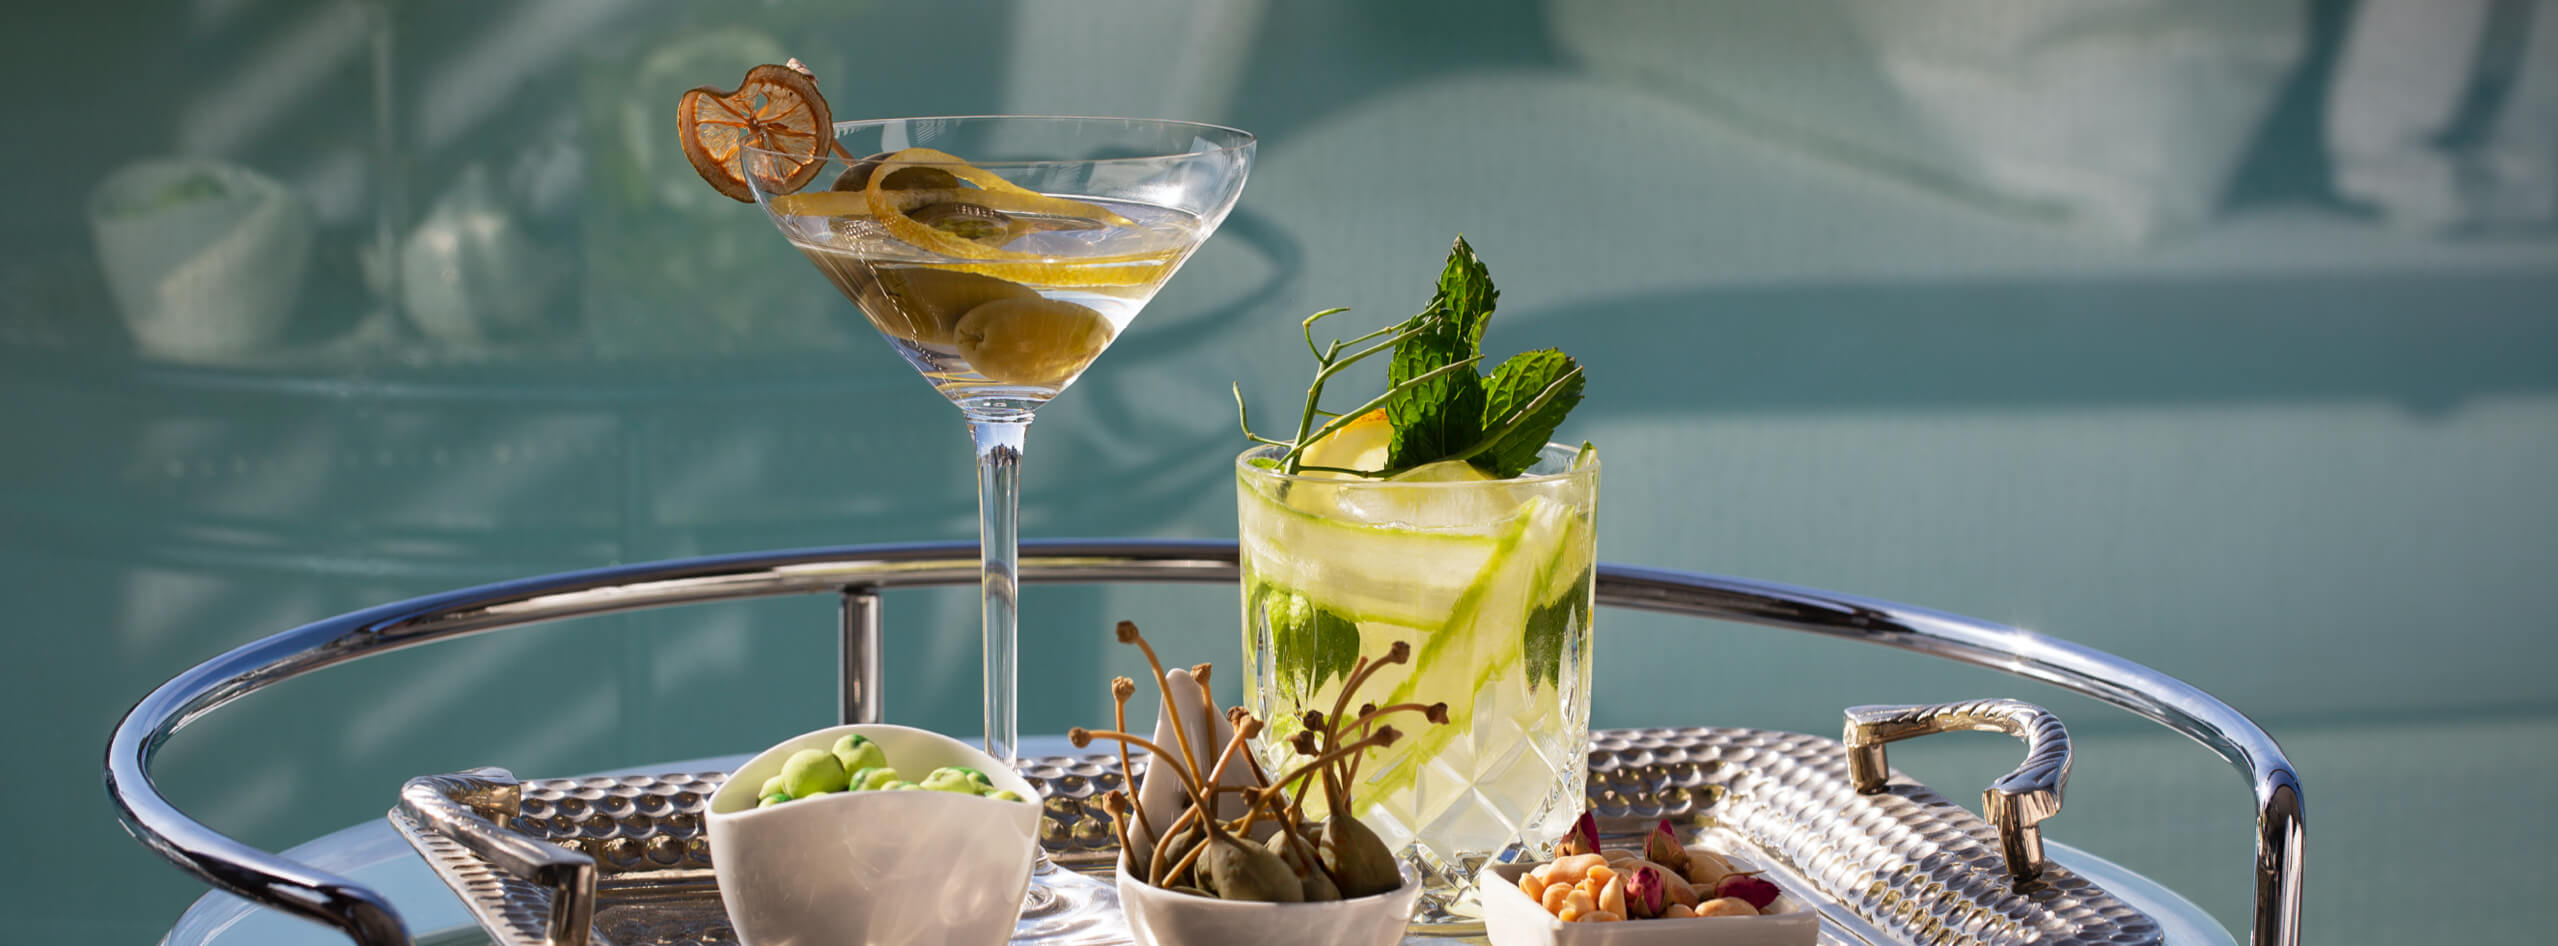 Summer Cocktail Aesthetic & Aperitifs with Harbour Views | Point Residence Luxury Auckland Waterfront Accommodation